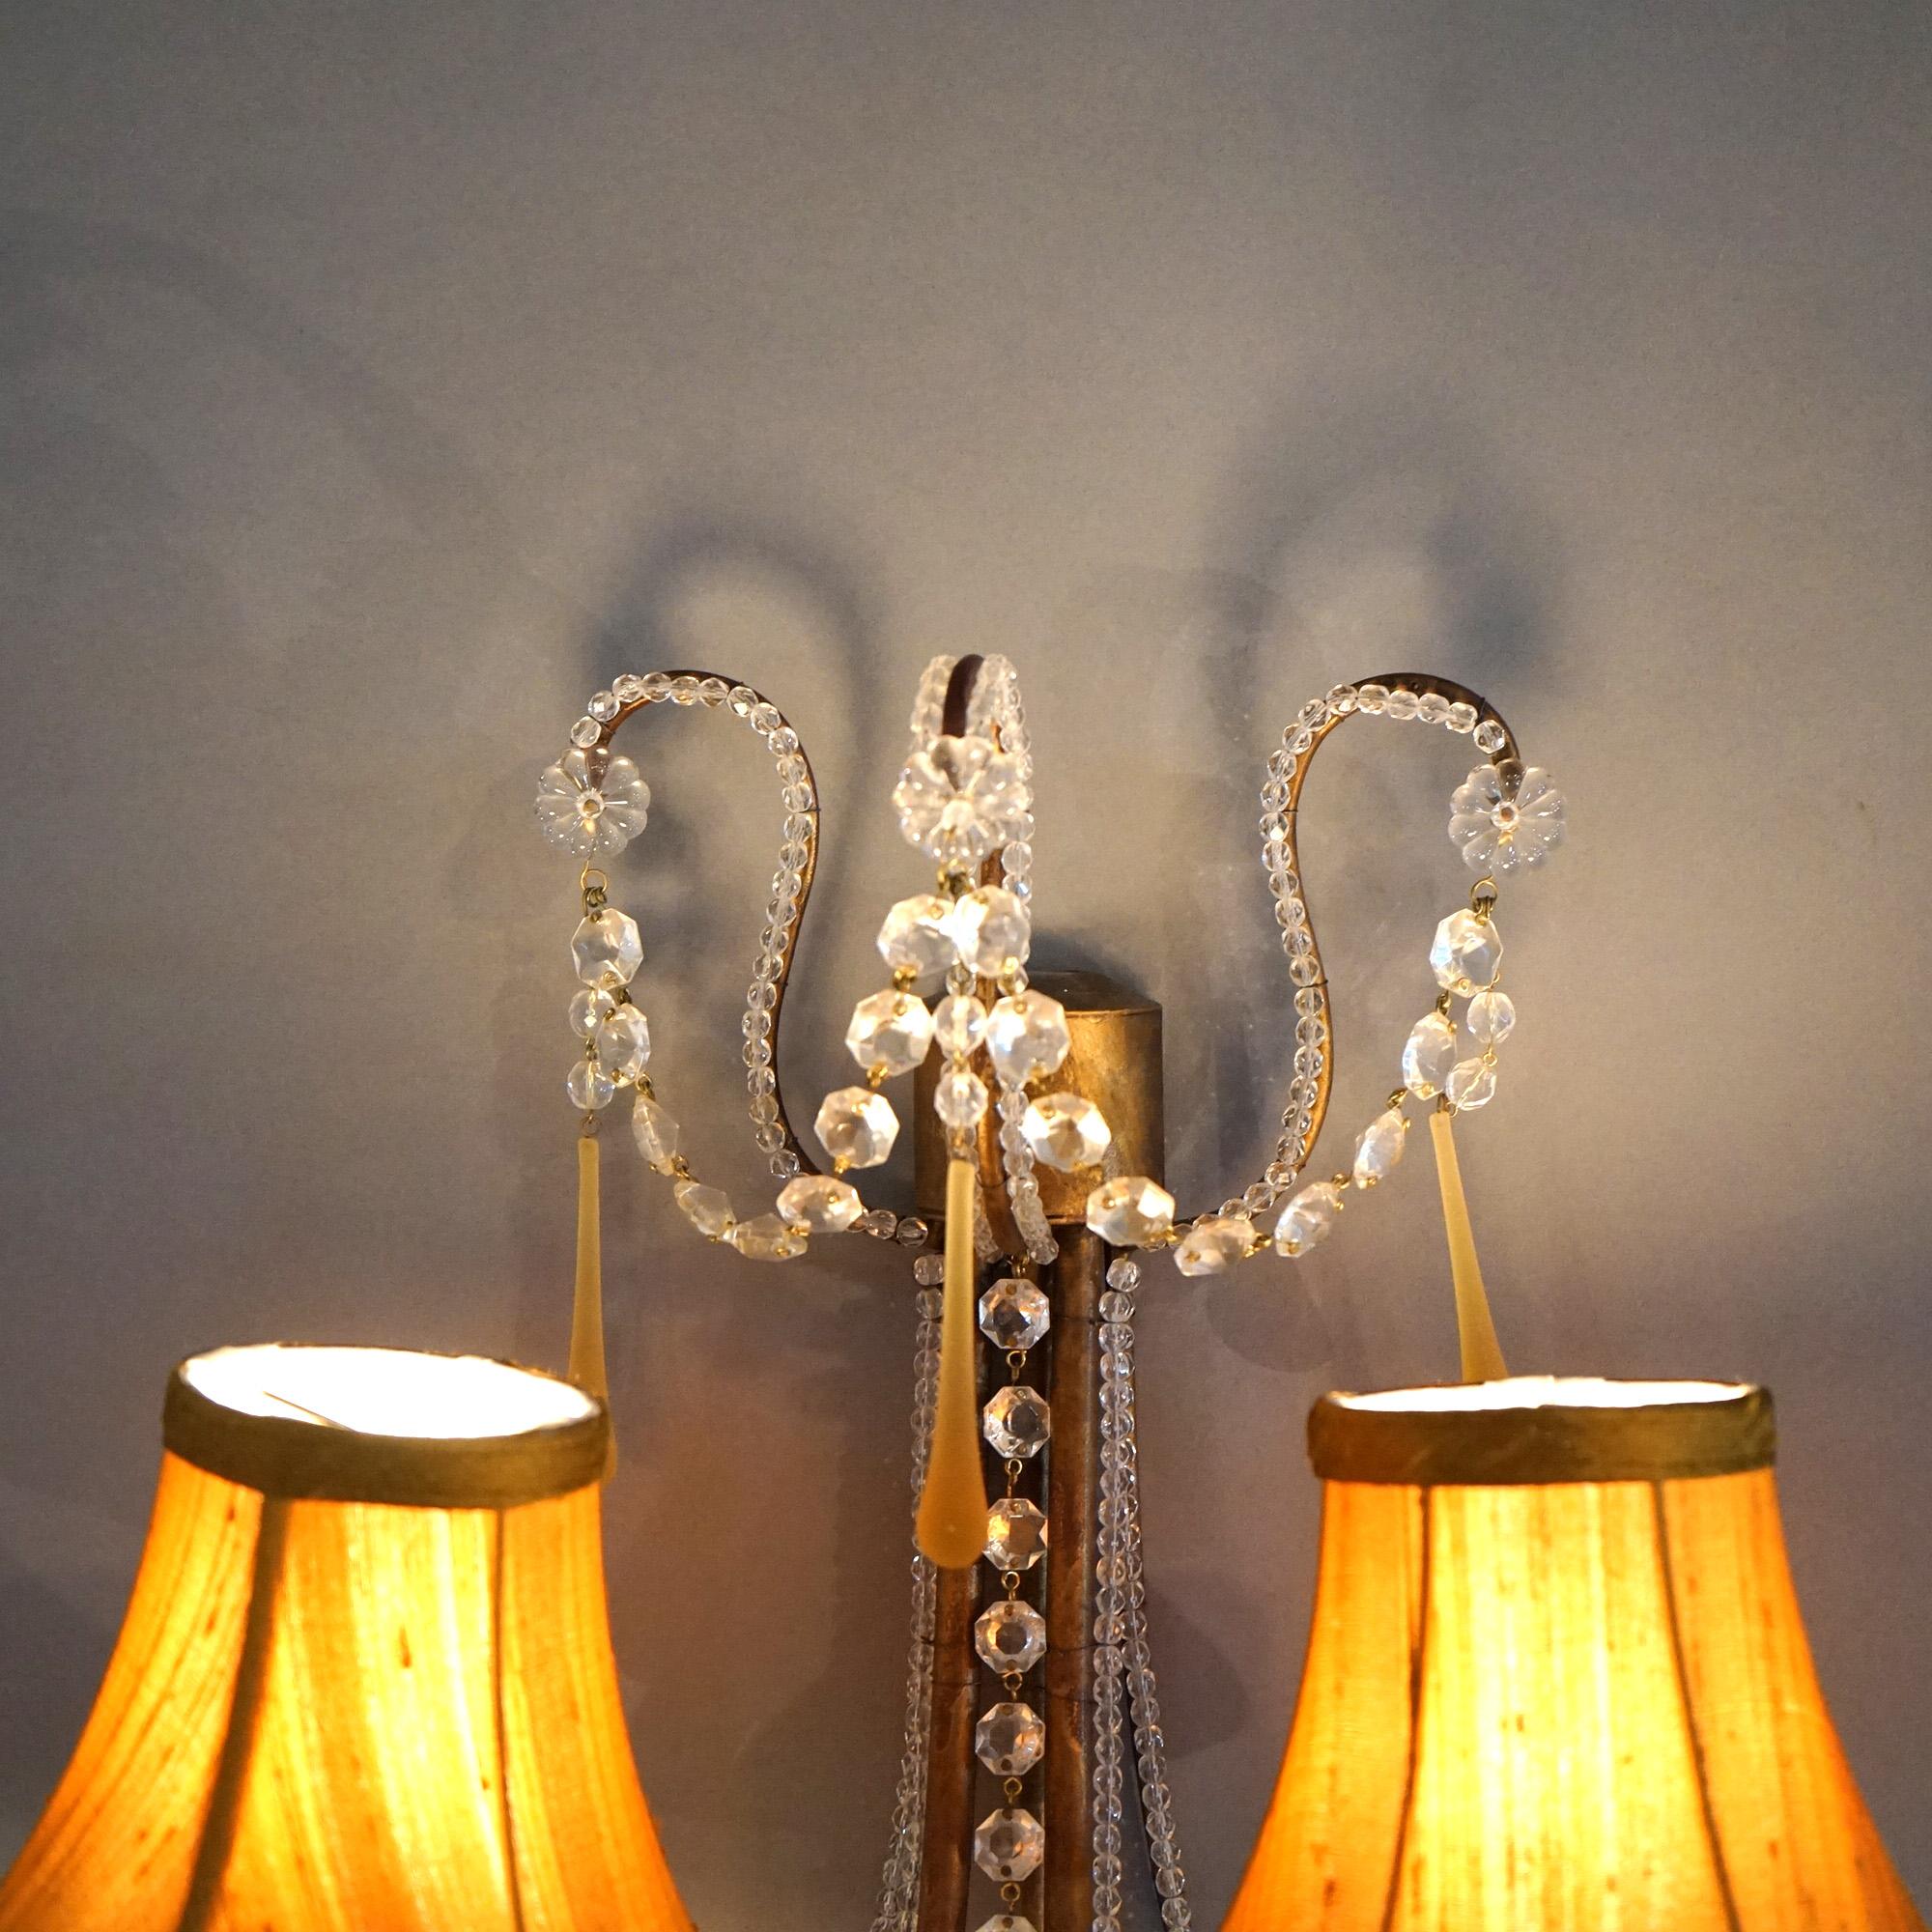 Antique Pair of French Louis XIV Style Crystal Wall Sconces 19thC For Sale 7